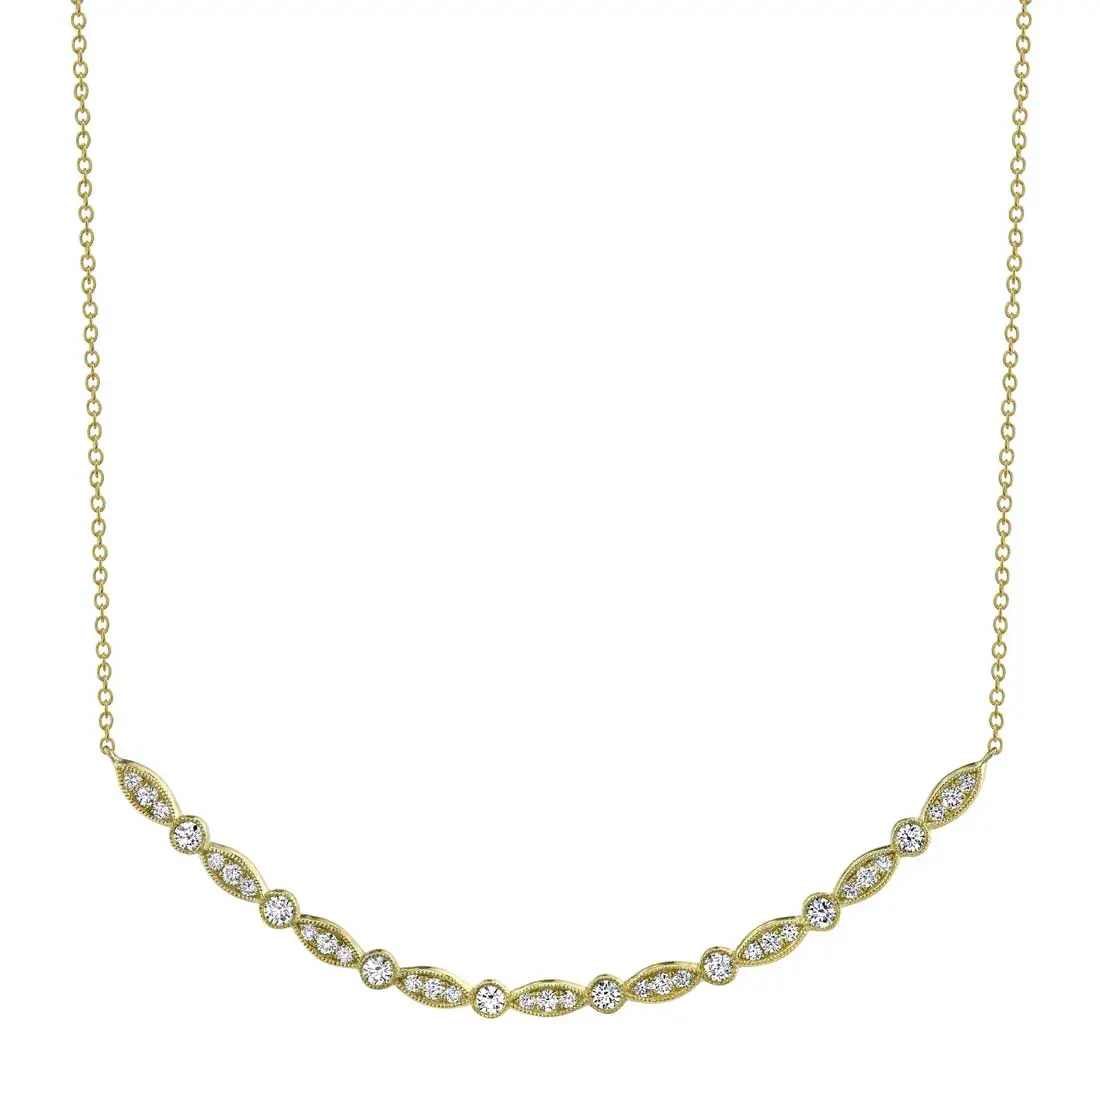 Vintage Inspired Diamond Curved Bar Necklace